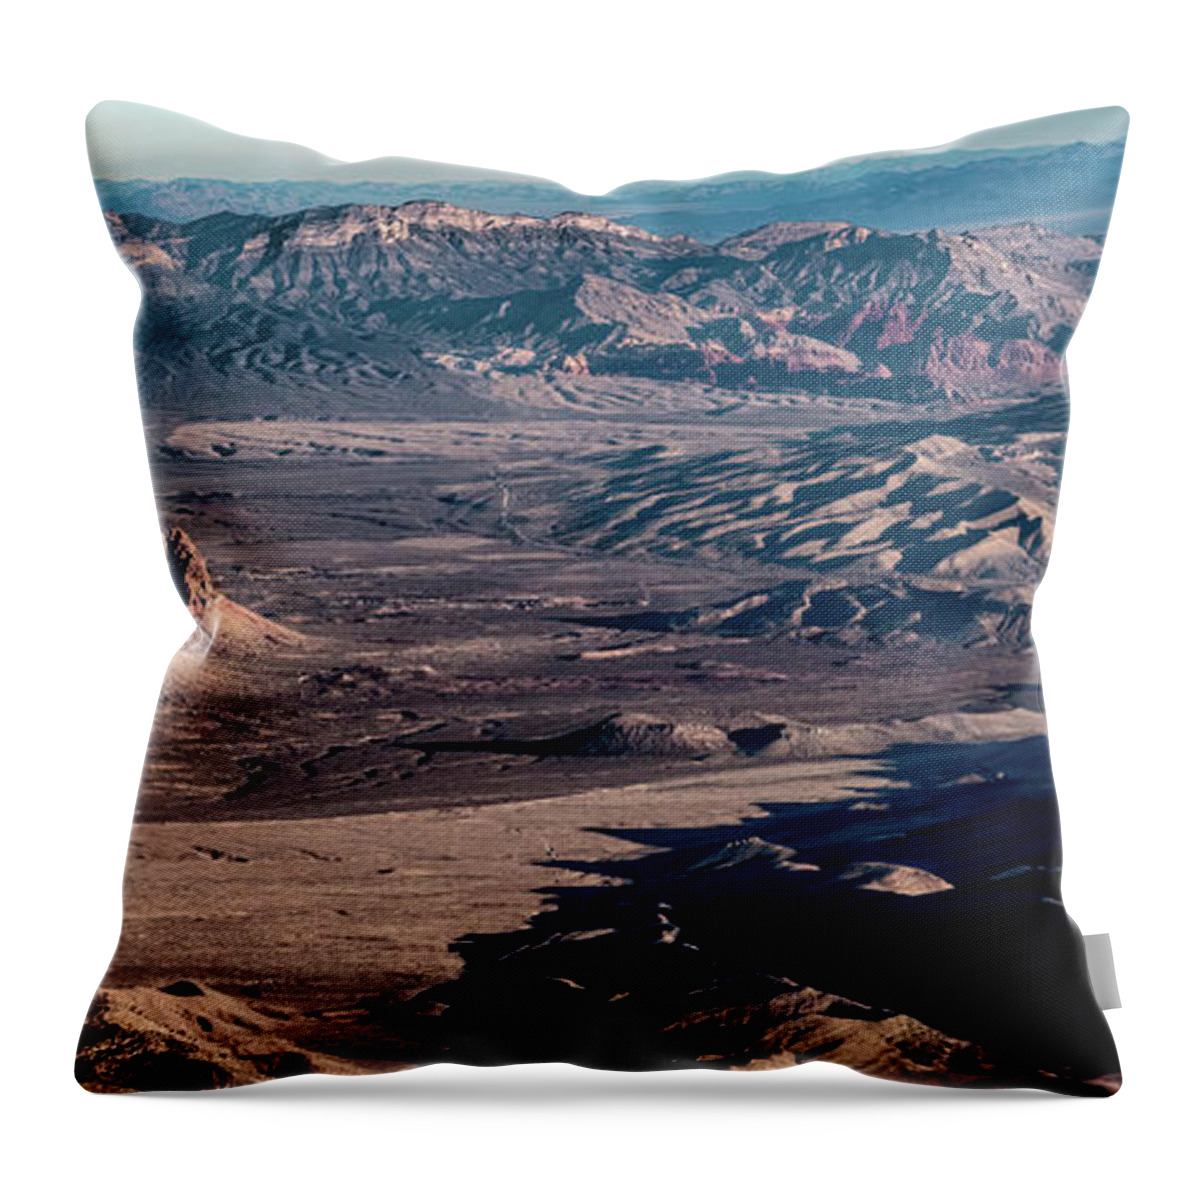  Throw Pillow featuring the photograph The Spring Mountains Las Vegas by Michael W Rogers